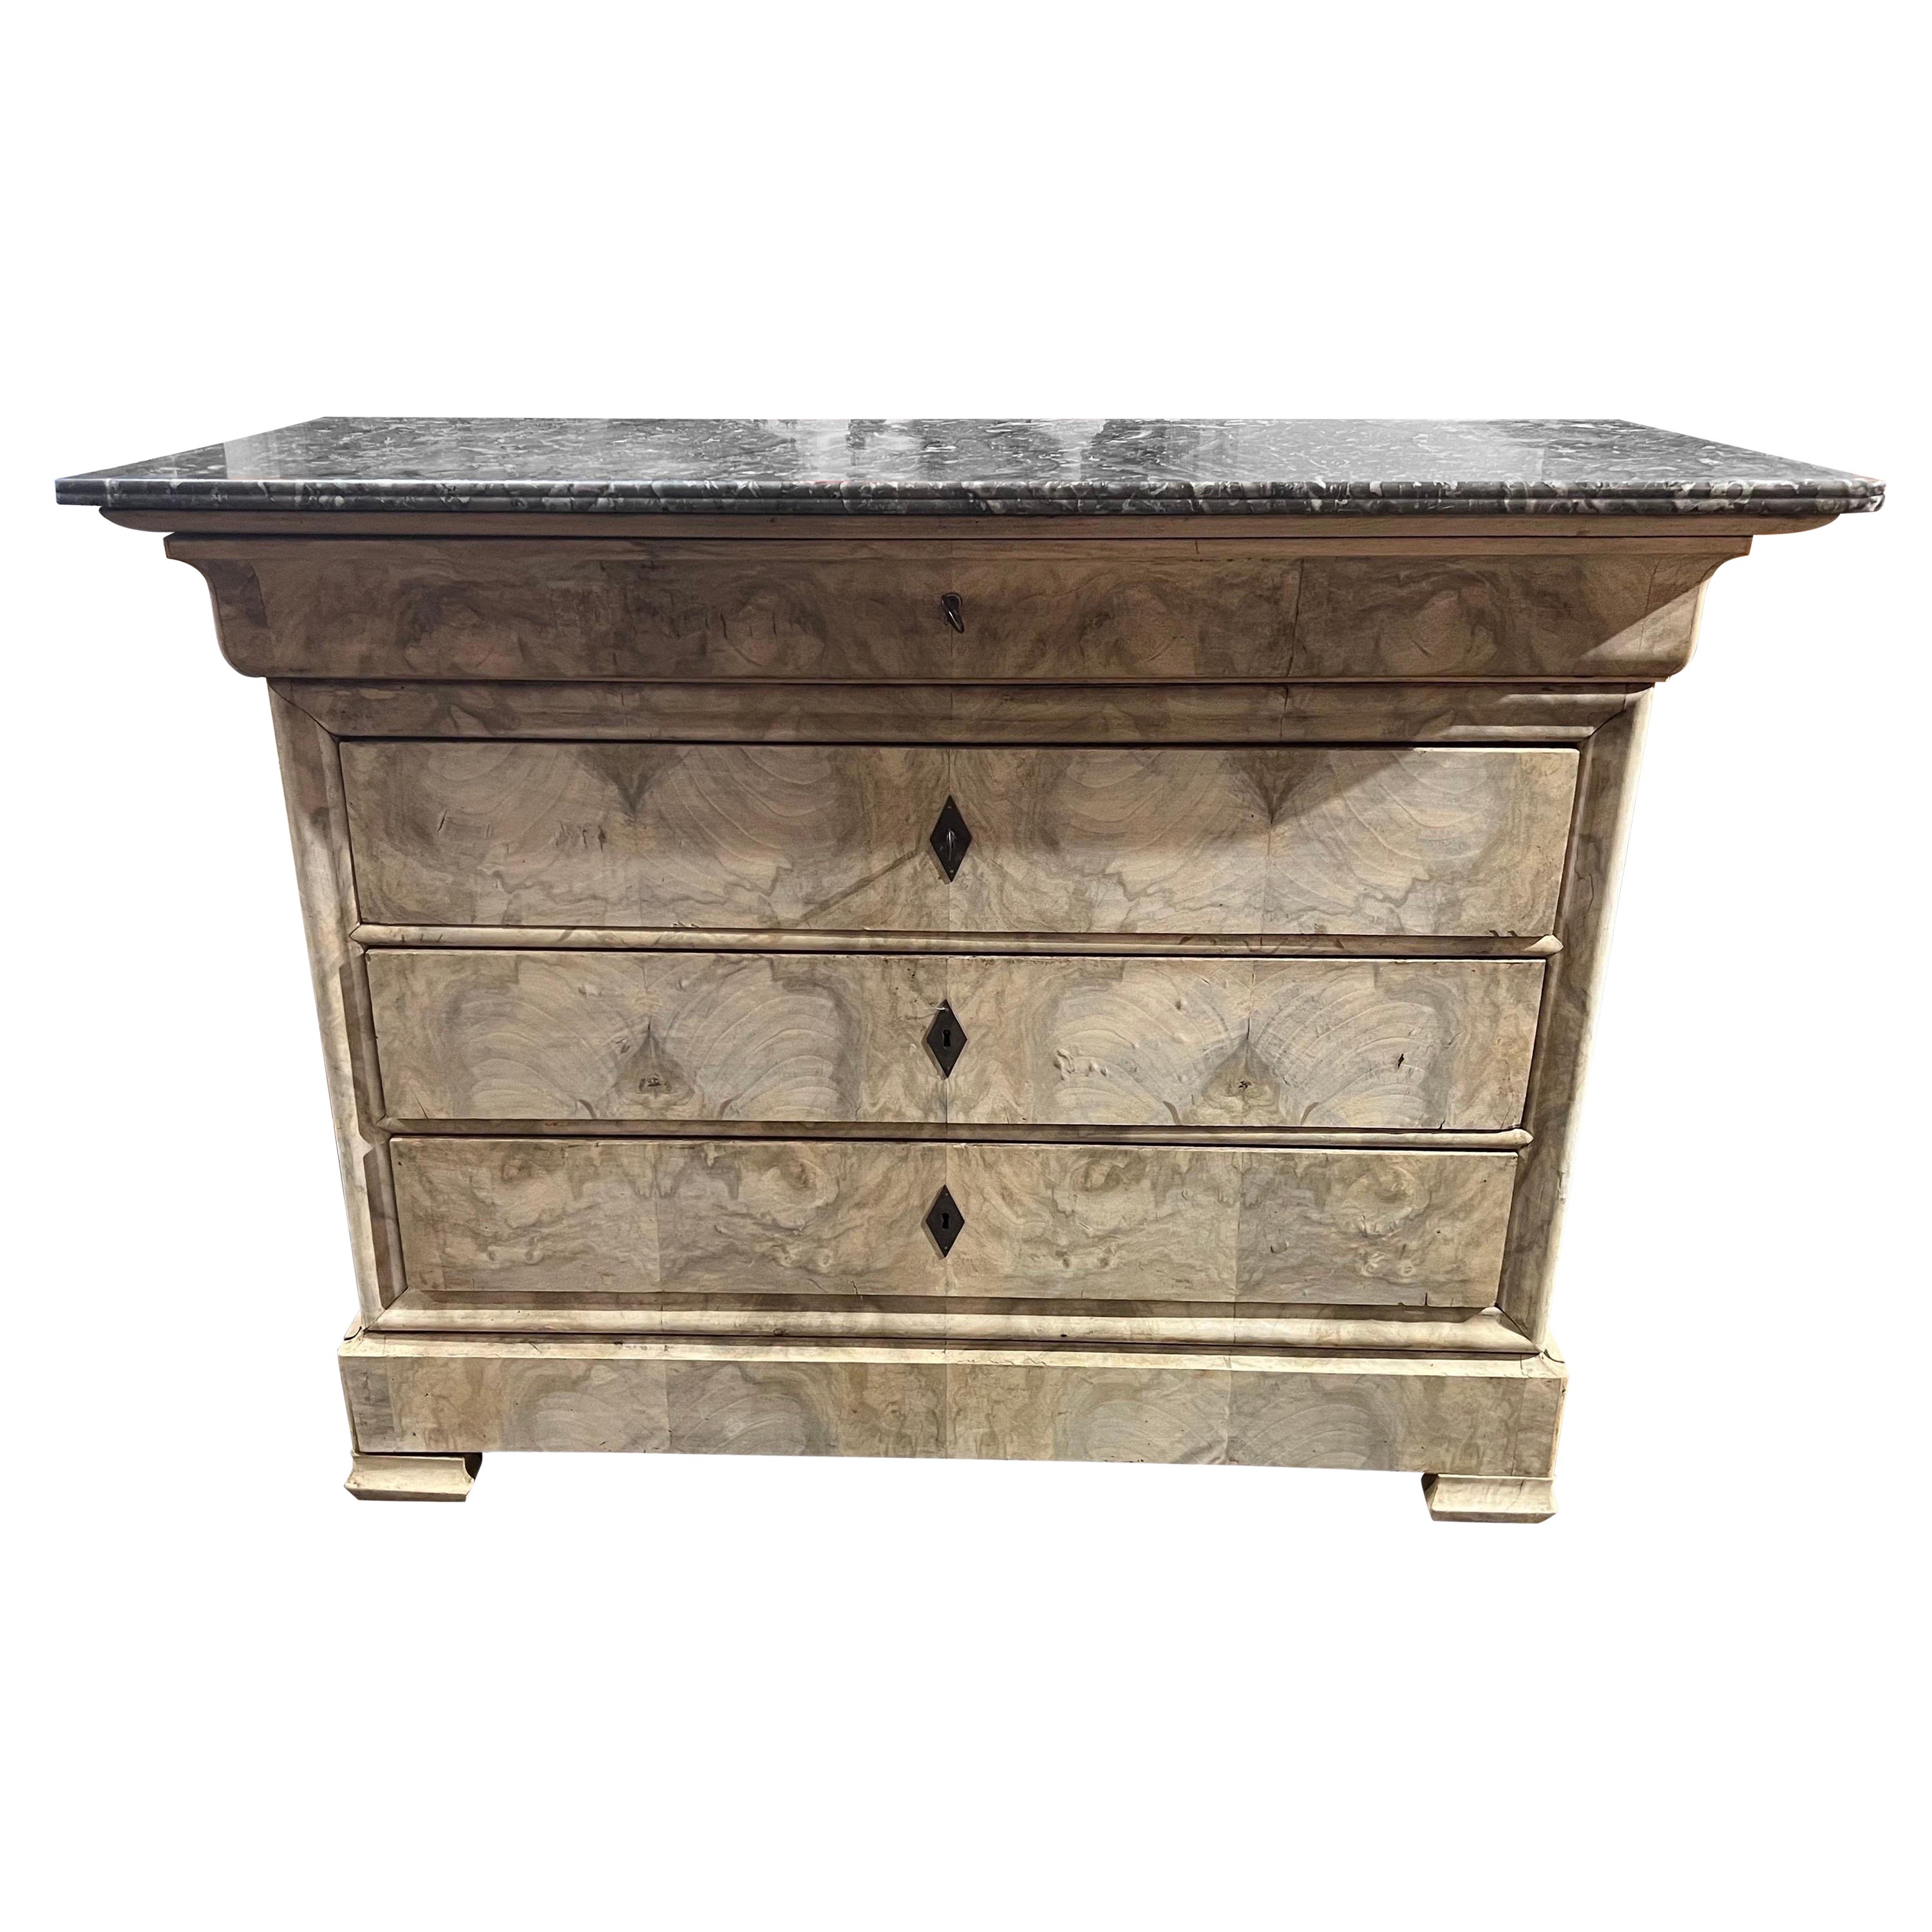 19th Century Bleached French Fossilized Marble Top Chest with Hidden Drawer